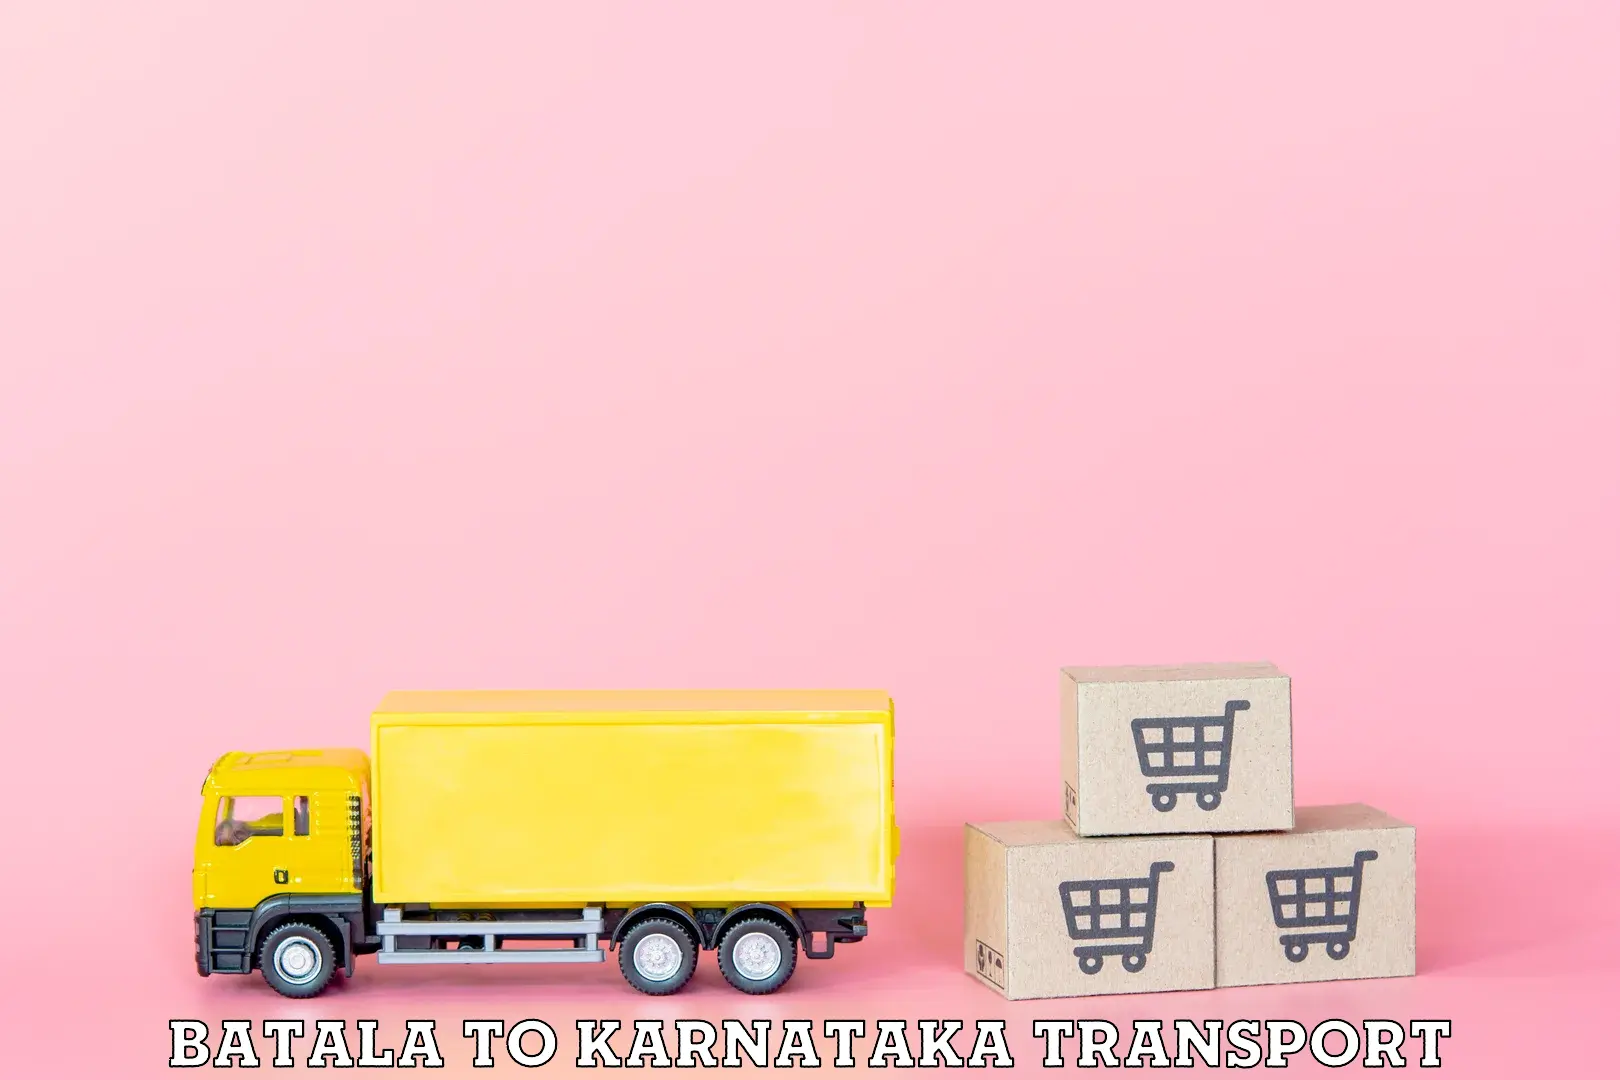 Truck transport companies in India Batala to Bhatkal